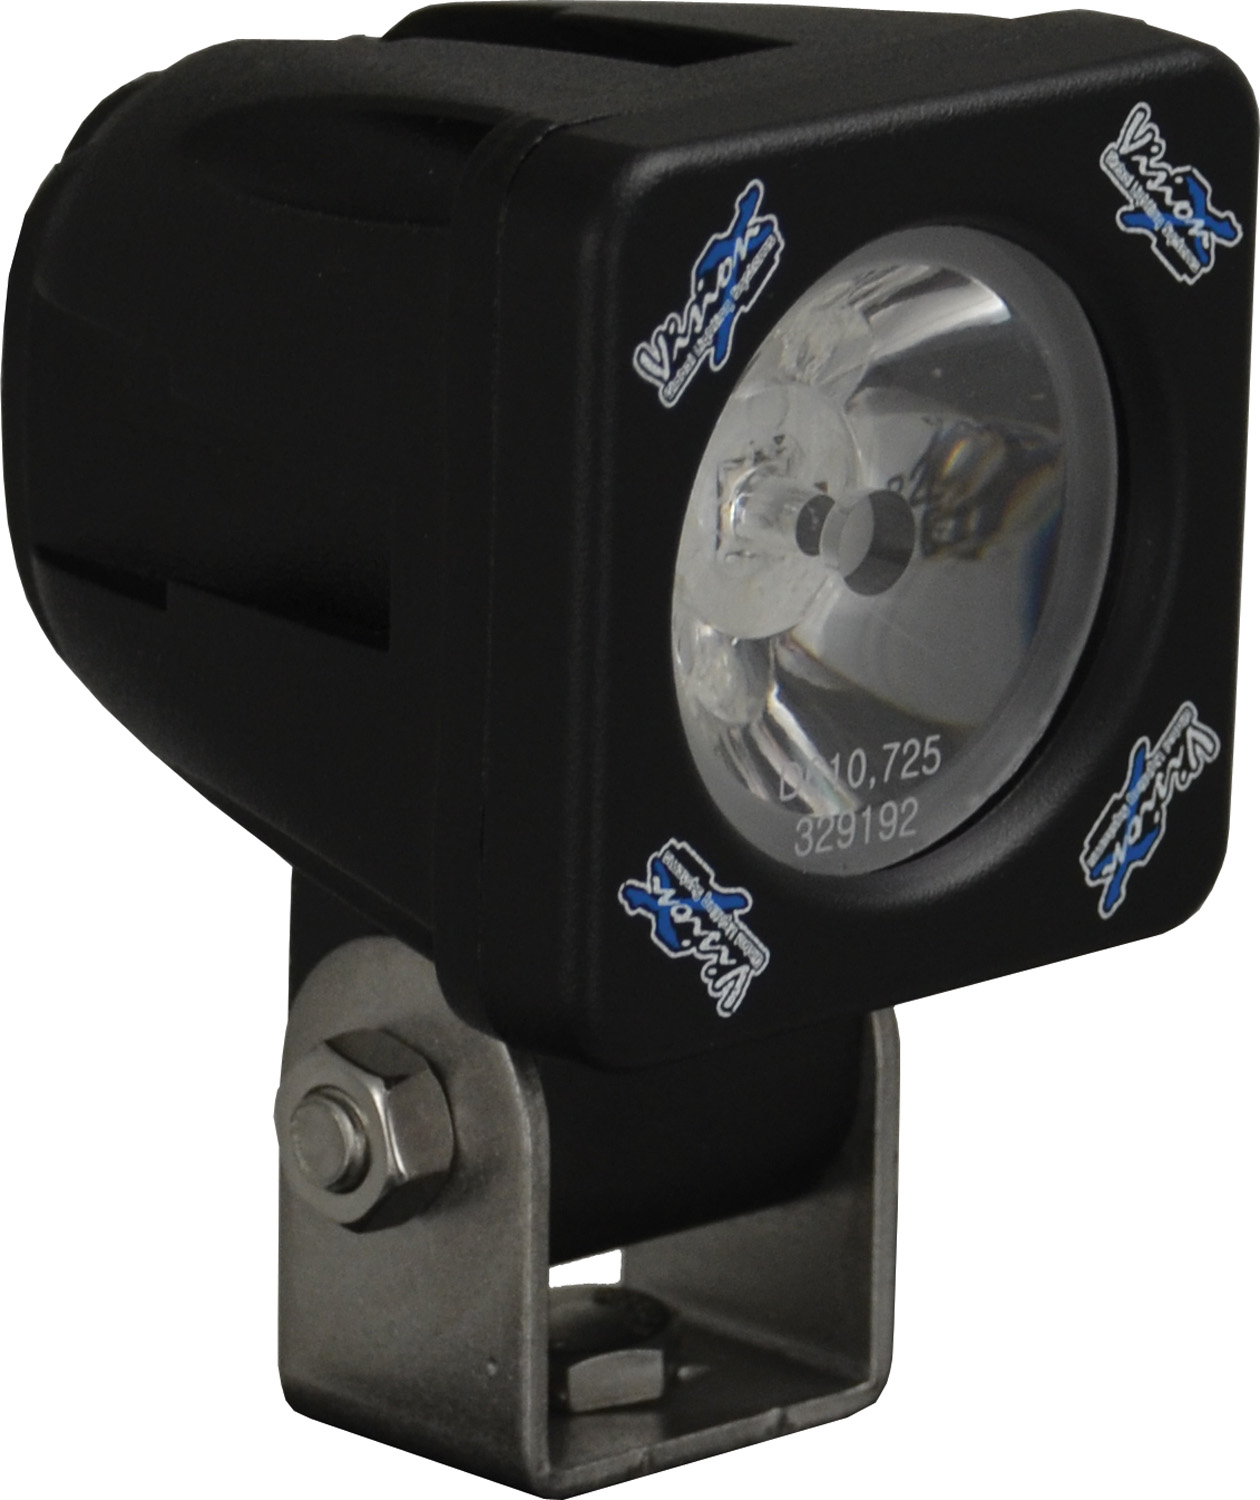 2 inch SOLSTICE SOLO BLACK 10W LED 60° XTRA WIDE